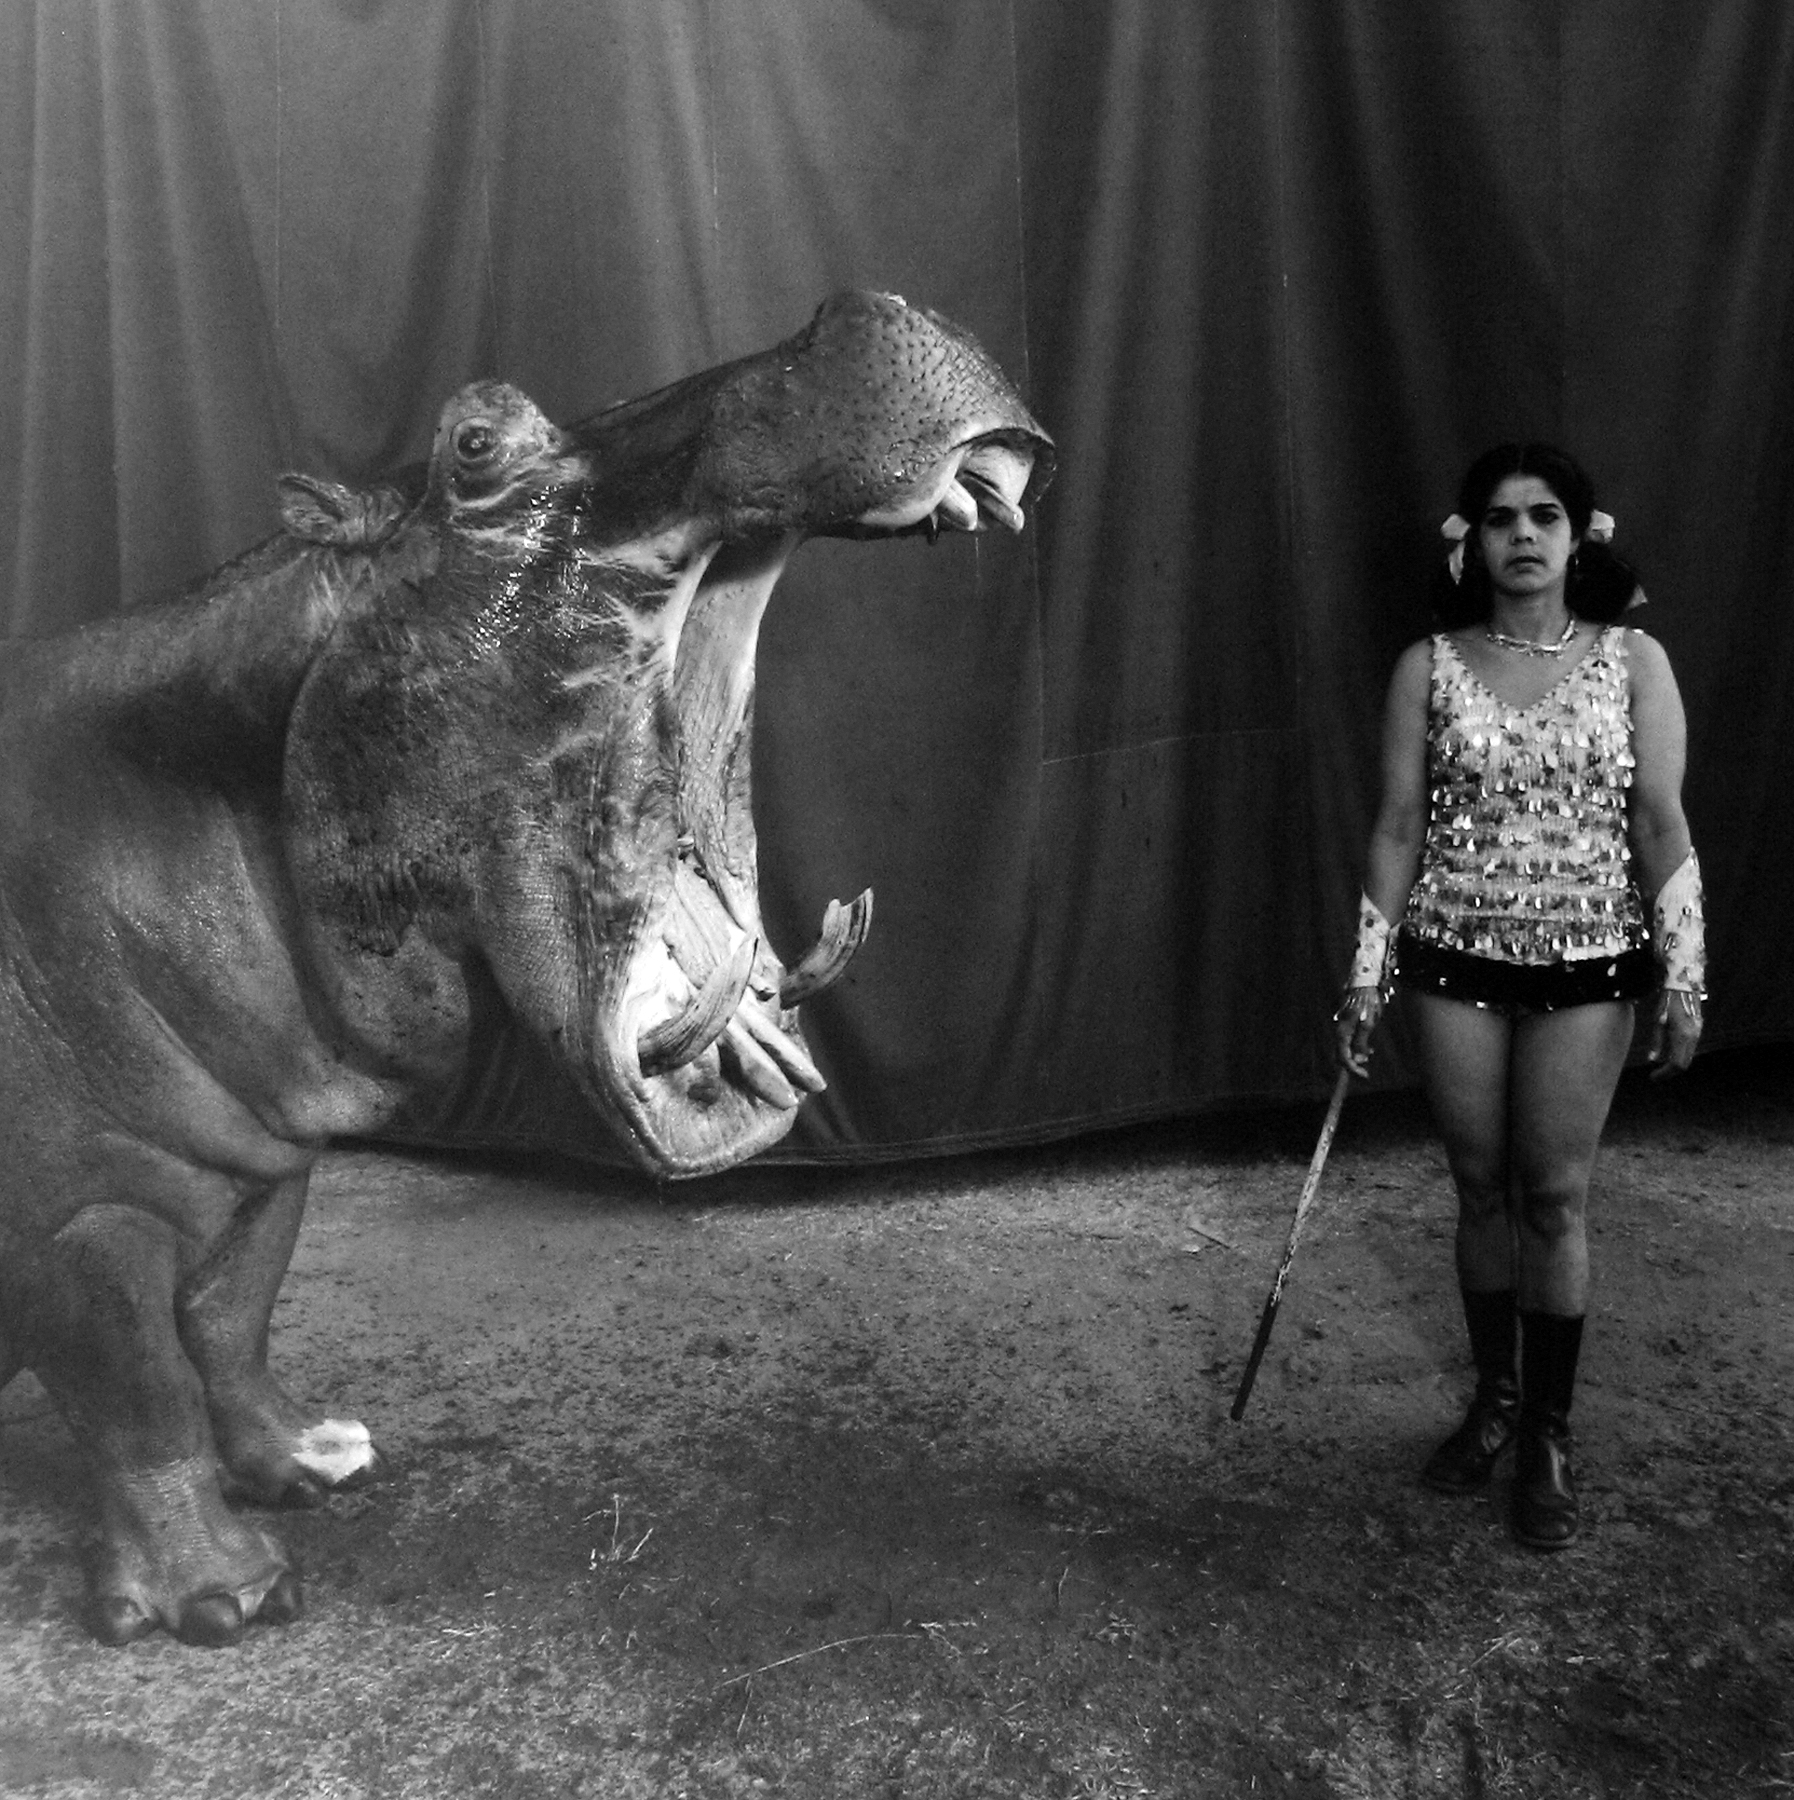 Mary Ellen Mark: Indian Circus, Transition Gallery